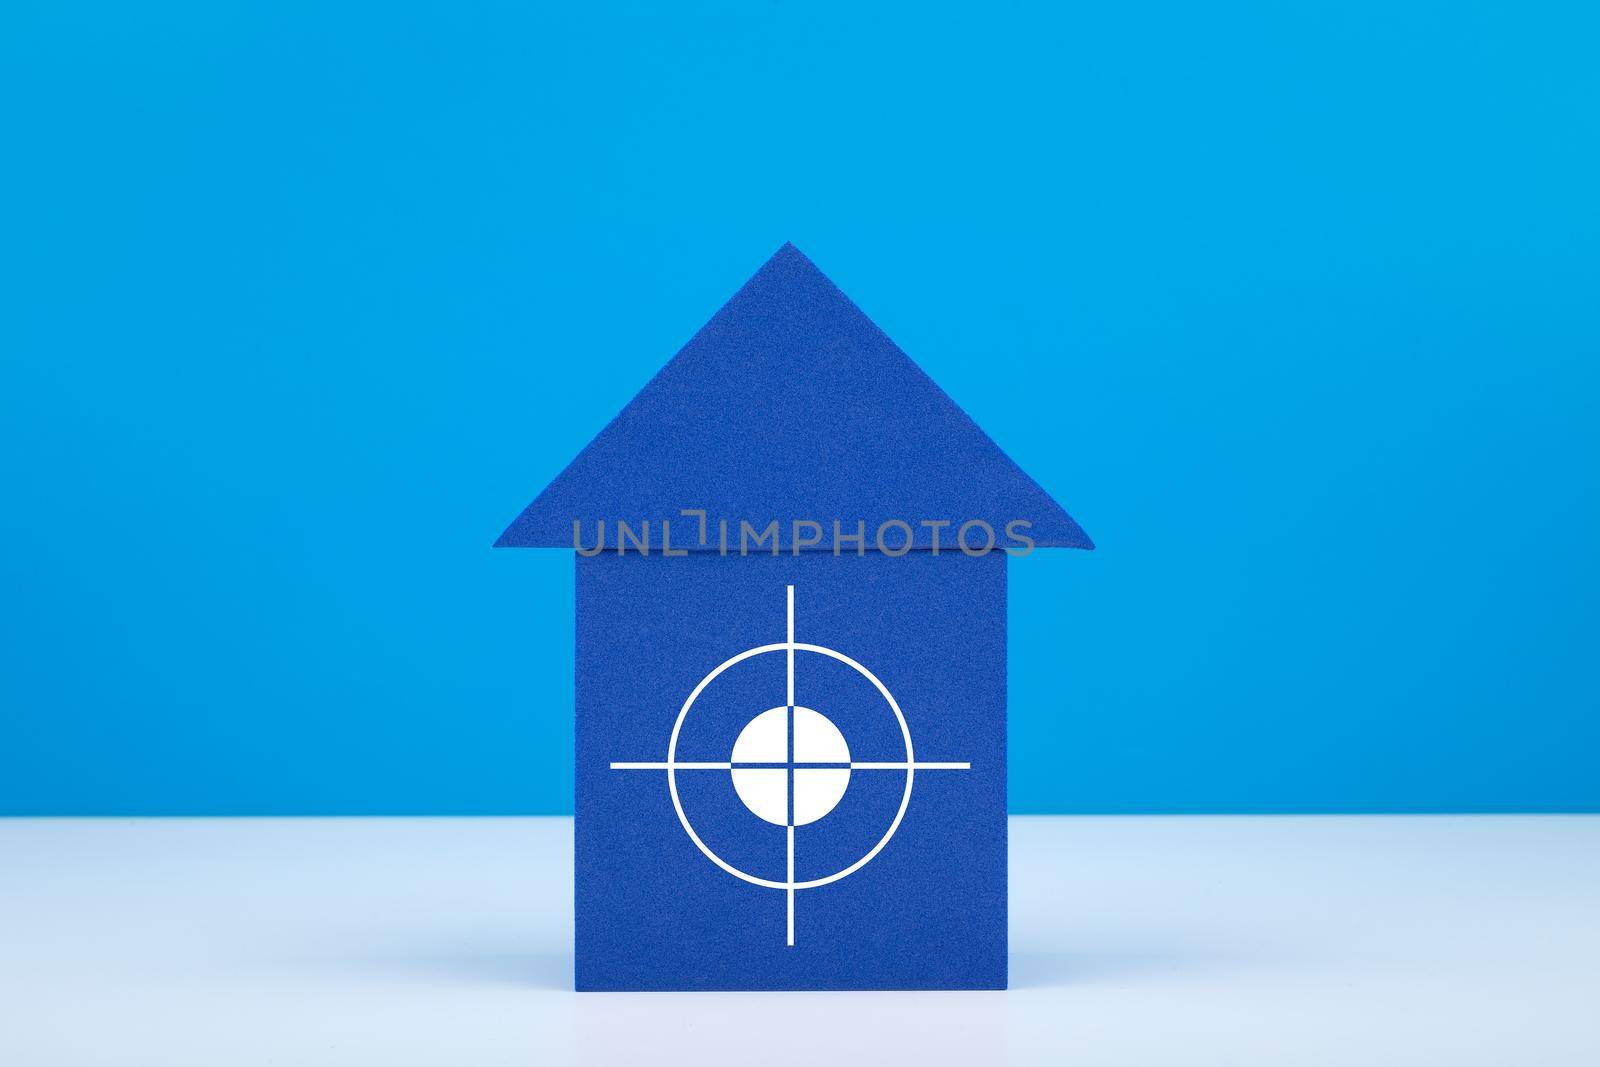 Blue toy house with target in the middle against blue background with copy space by Senorina_Irina